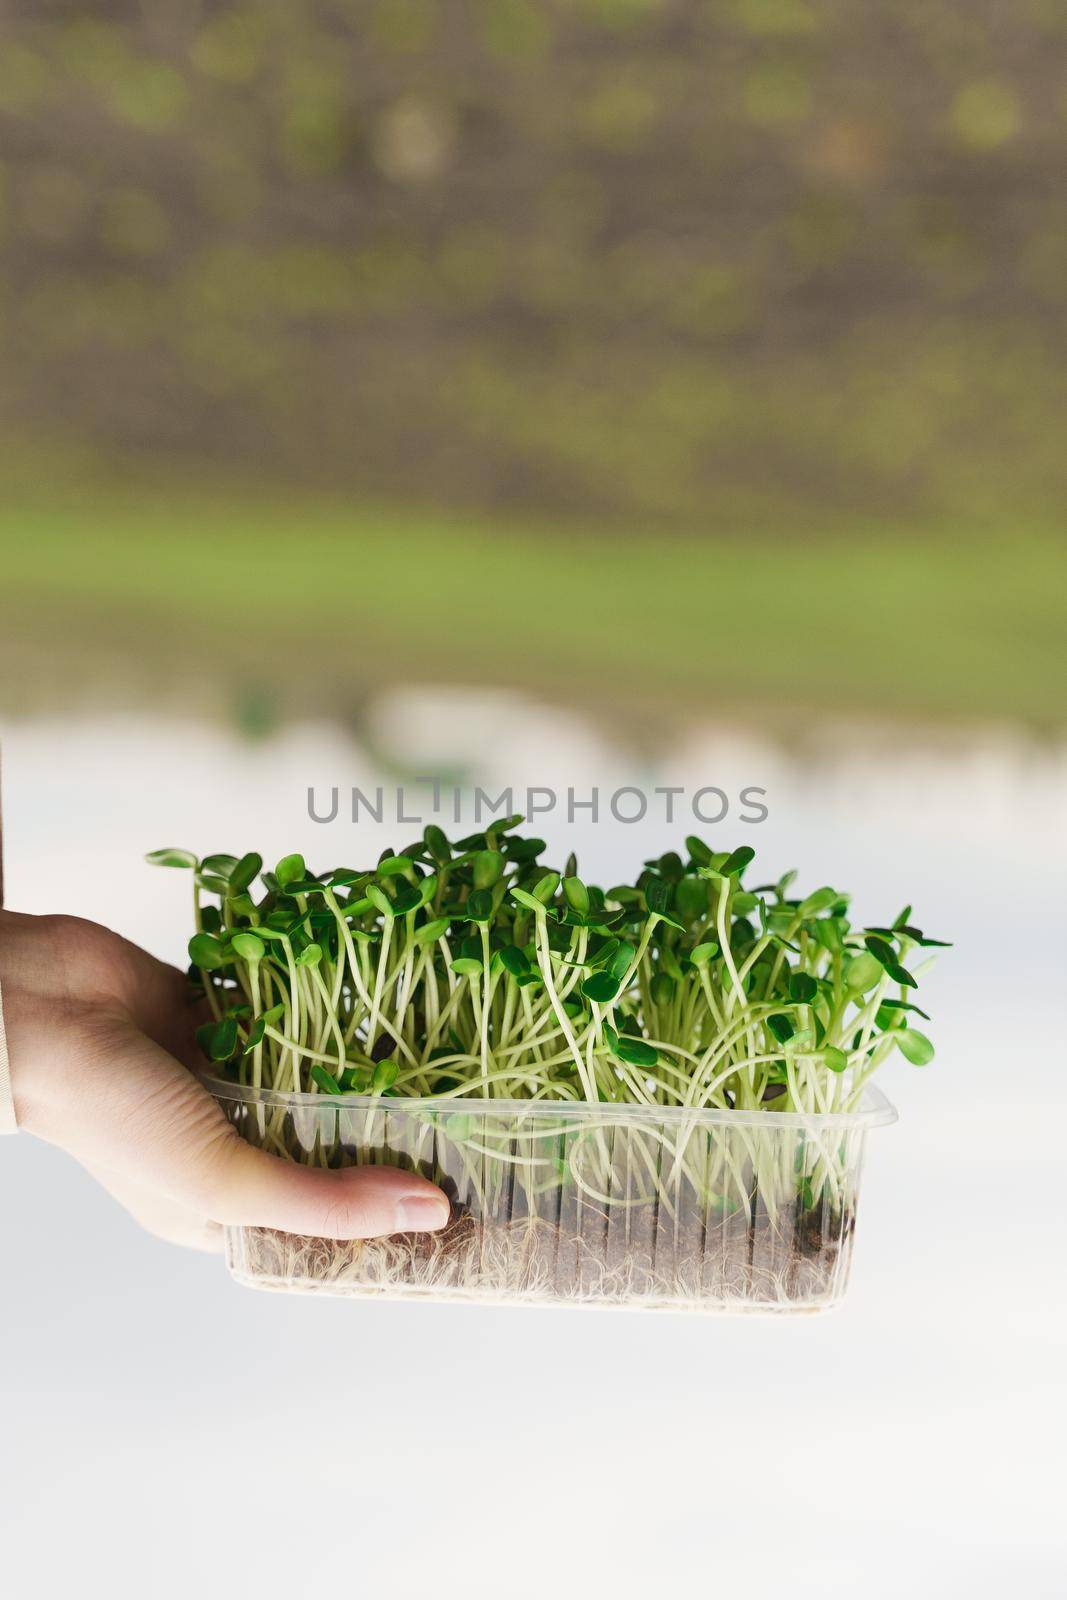 Microgreen of sunflower seeds in hands. creative upside down photo. Idea for healthy vegan green microgreen advert. Vegeterian food delivery service by Rabizo